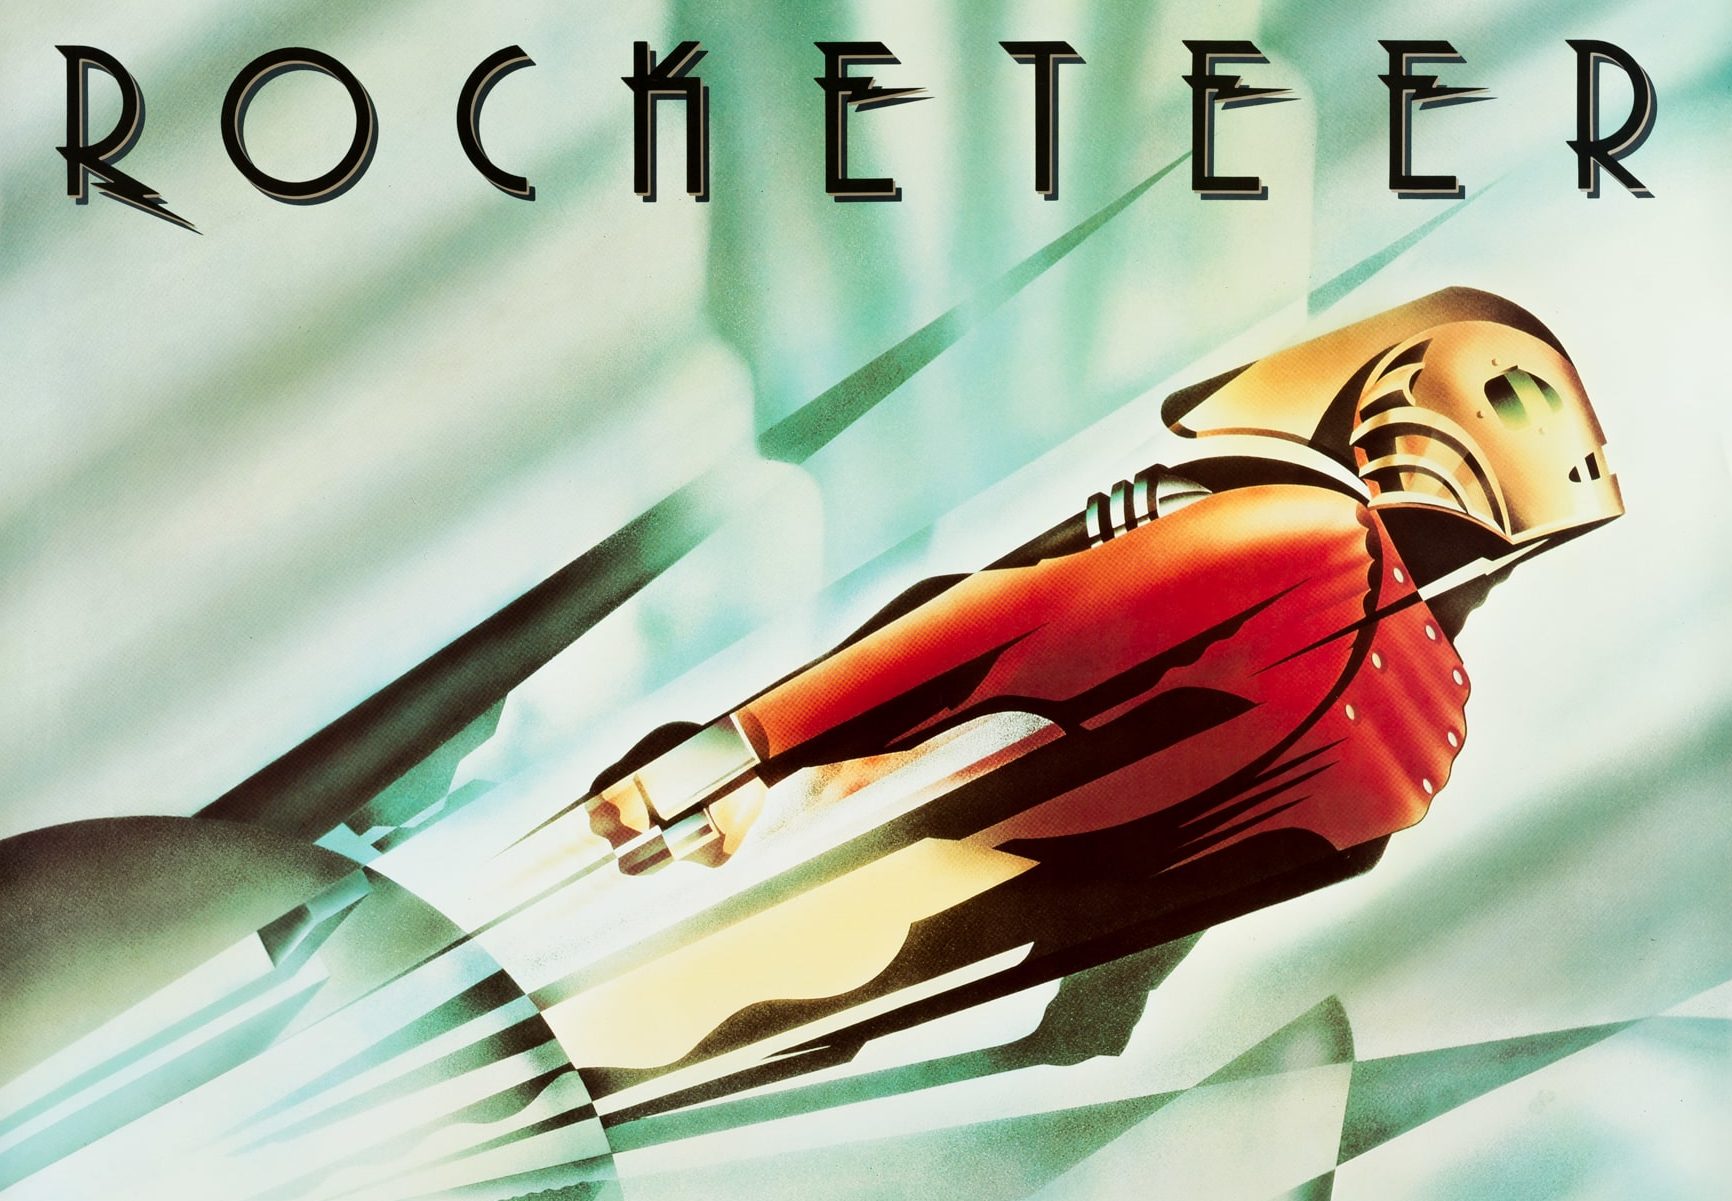 The Rocketeer Movie | The Guy Blog